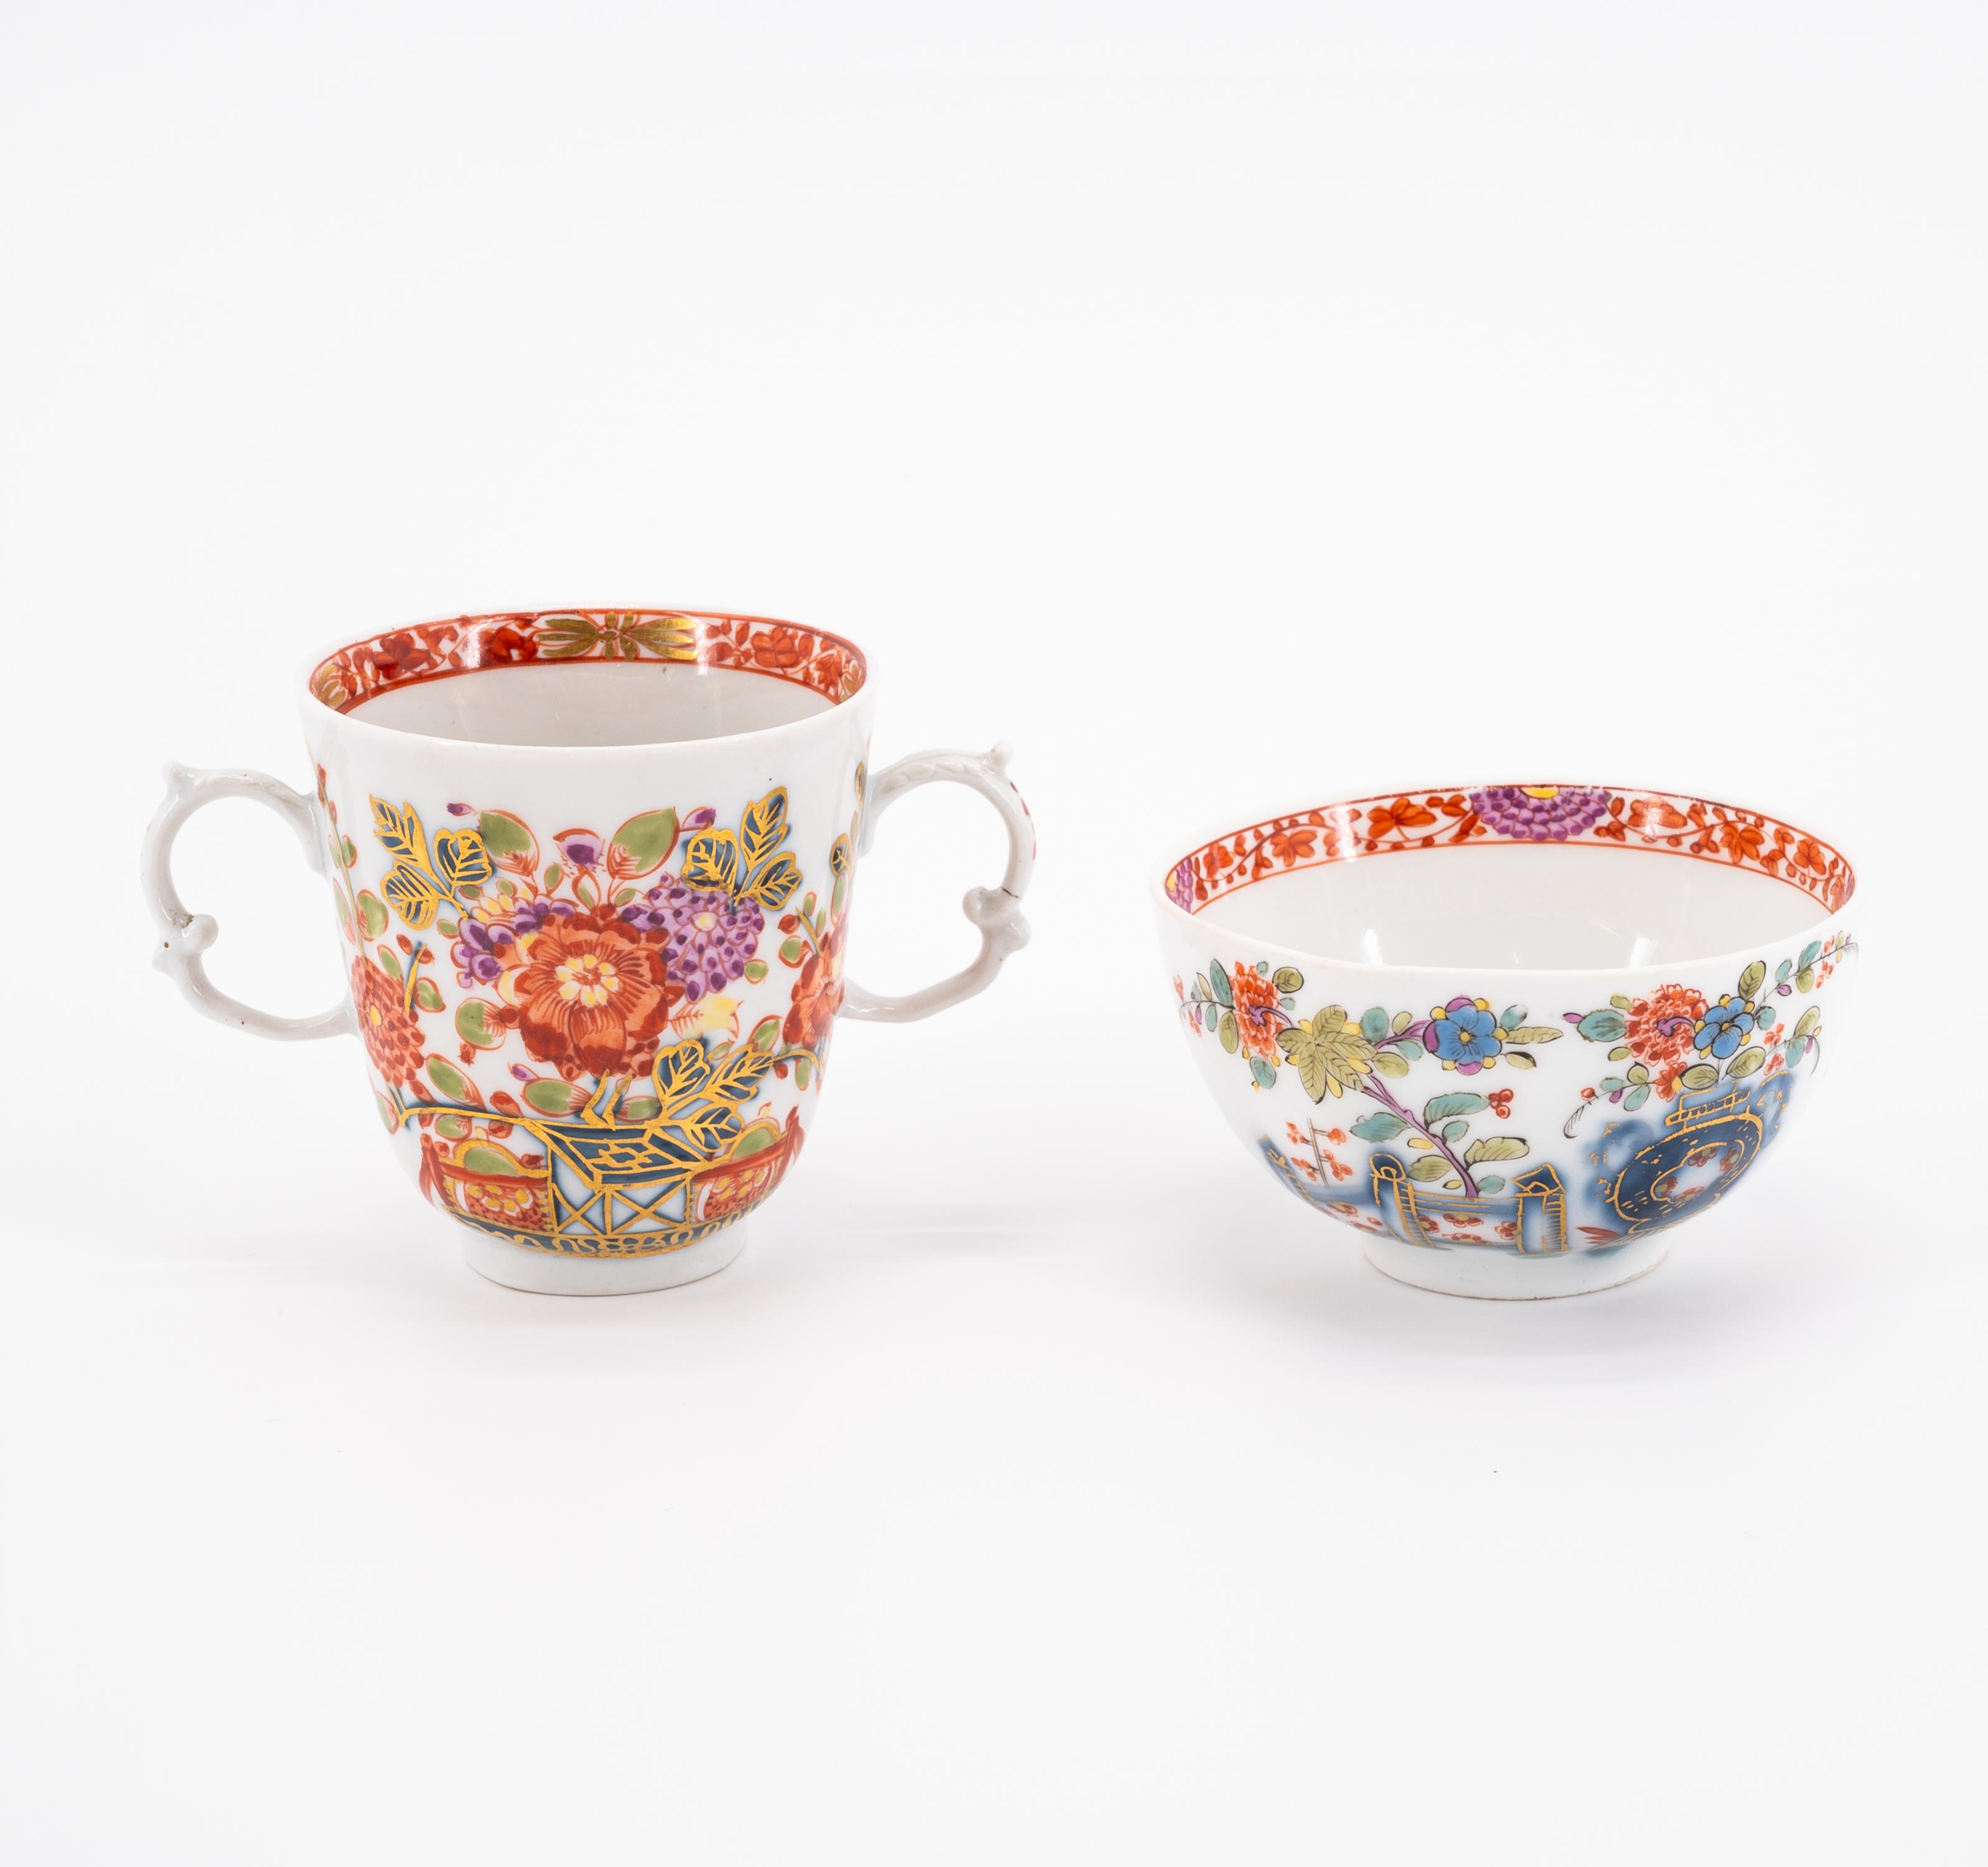 PORCELAIN TREMBLEUSE, TEA BOWL AND SAUCER WITH TABLE PATTERN AND KAKIEMON DECOR - Image 2 of 8